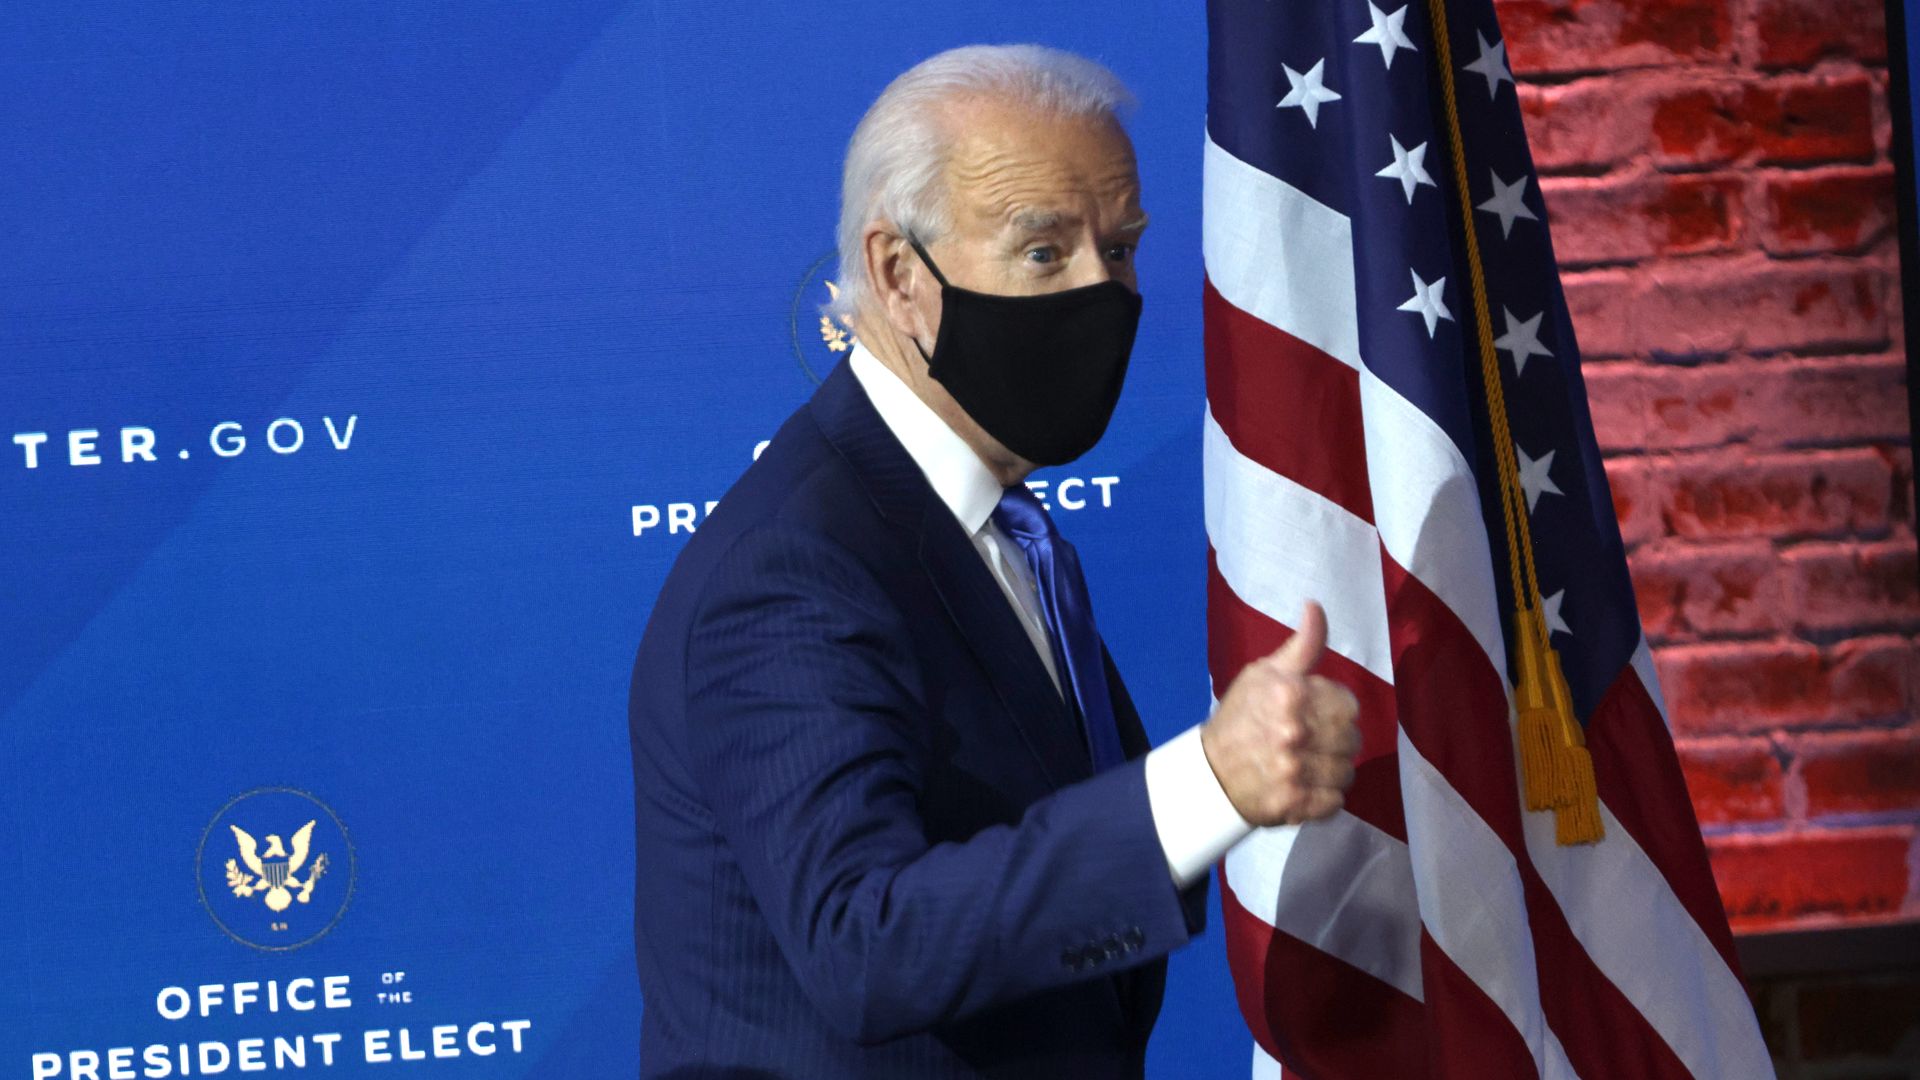 Picture of Joe Biden wearing a mask and giving a thumbs up